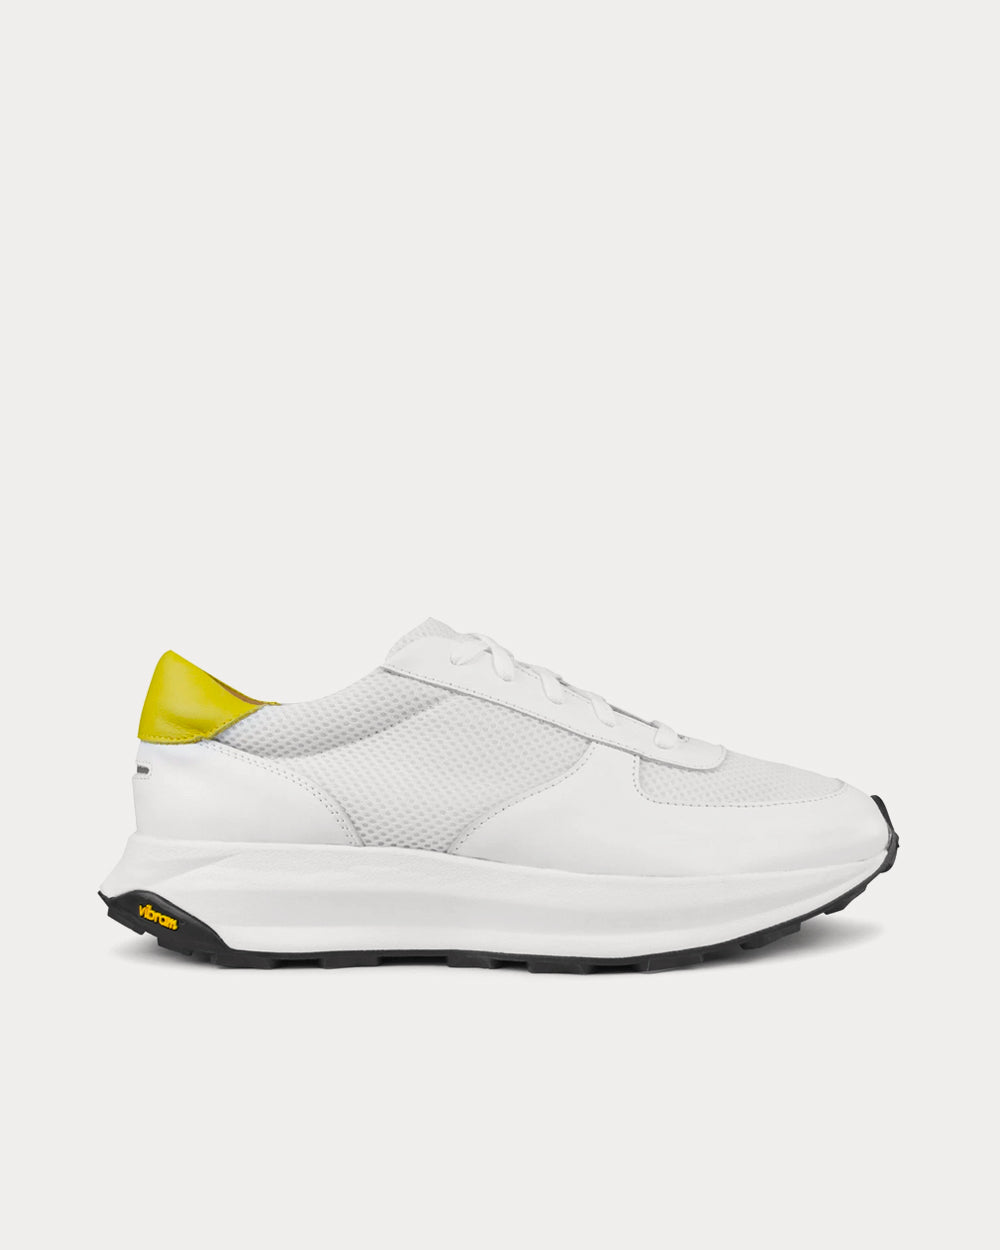 Unseen Footwear - Trinity Tech Leather & Mesh White / Yellow Low Top Sneakers